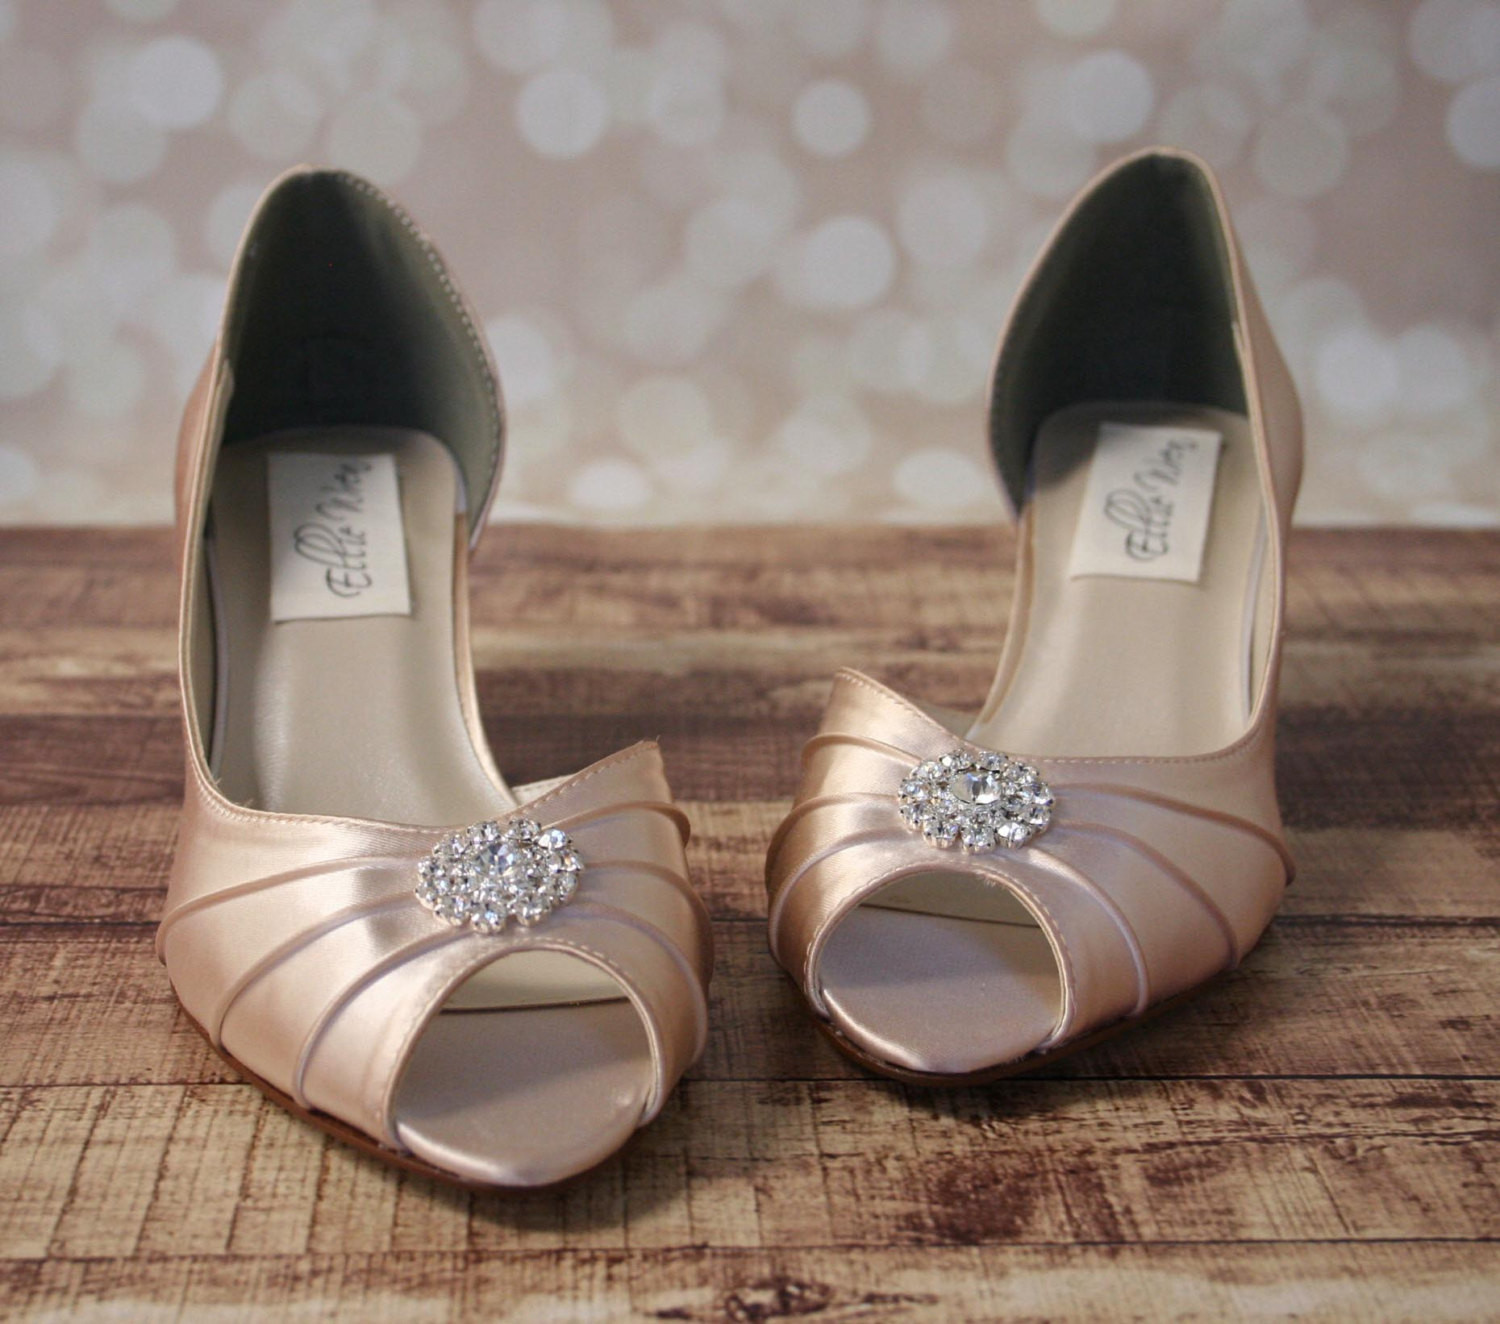 Blush Colored Wedding Shoes
 Blush Wedding Shoes Blush Pink Kitten Heels with Simple